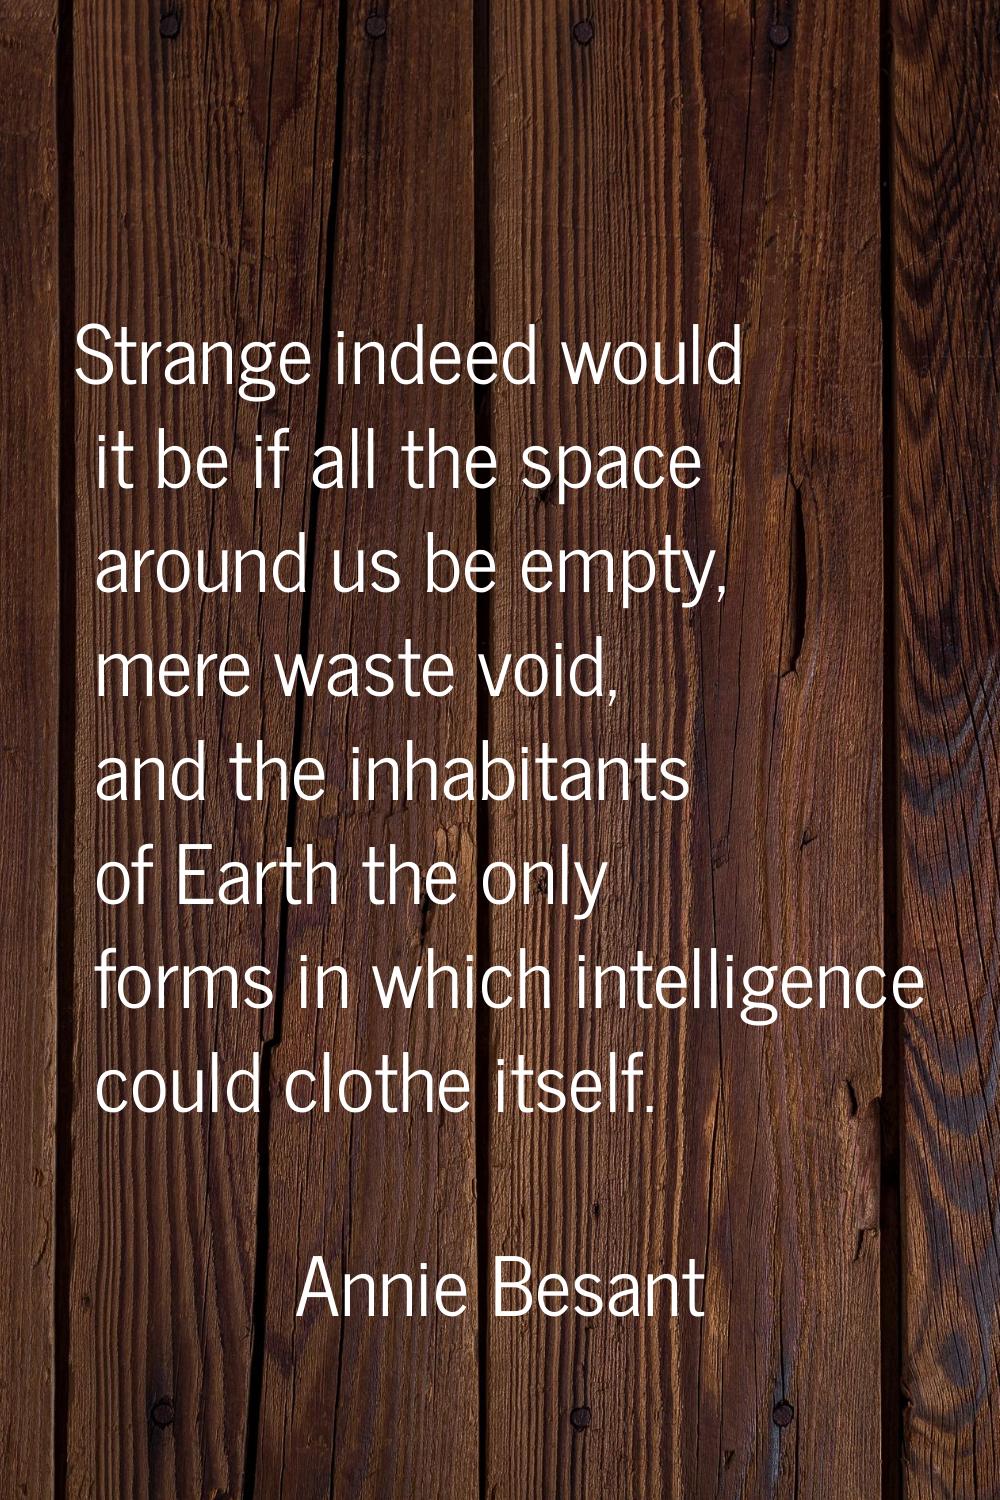 Strange indeed would it be if all the space around us be empty, mere waste void, and the inhabitant